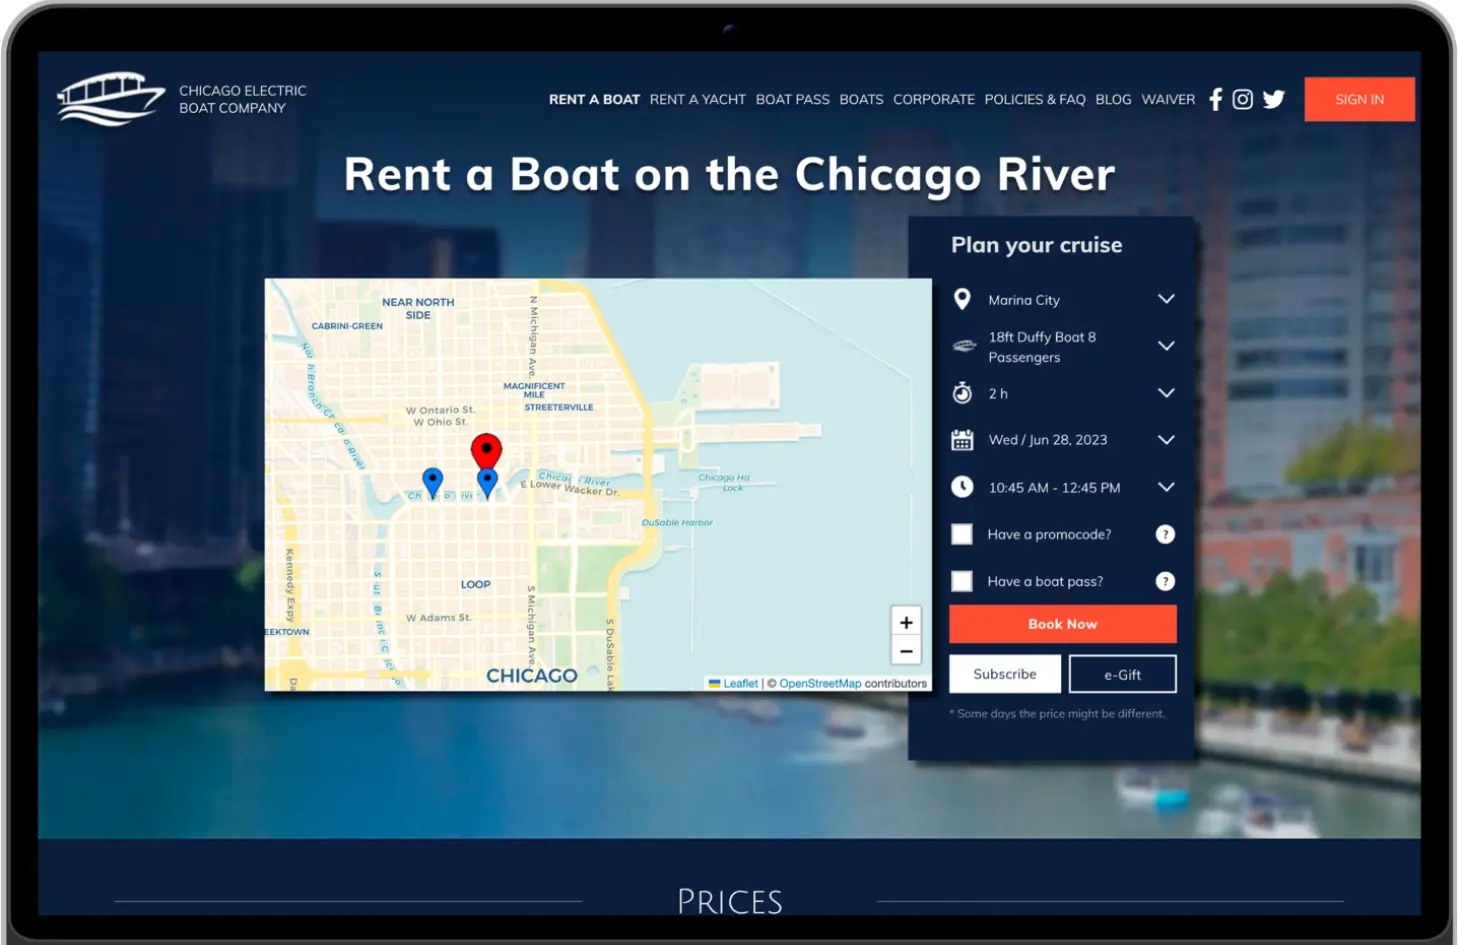 Chicago Electric Boat Company, offers a unique, memorable, and environmentally friendly way to see the great city of Chicago. A prominent boat lending company approached us in 2014 with the aim of enhancing their business processes through the development of a custom reservation system. The project involved web design and development, focusing on creating a robust platform to manage boat reservations efficiently.